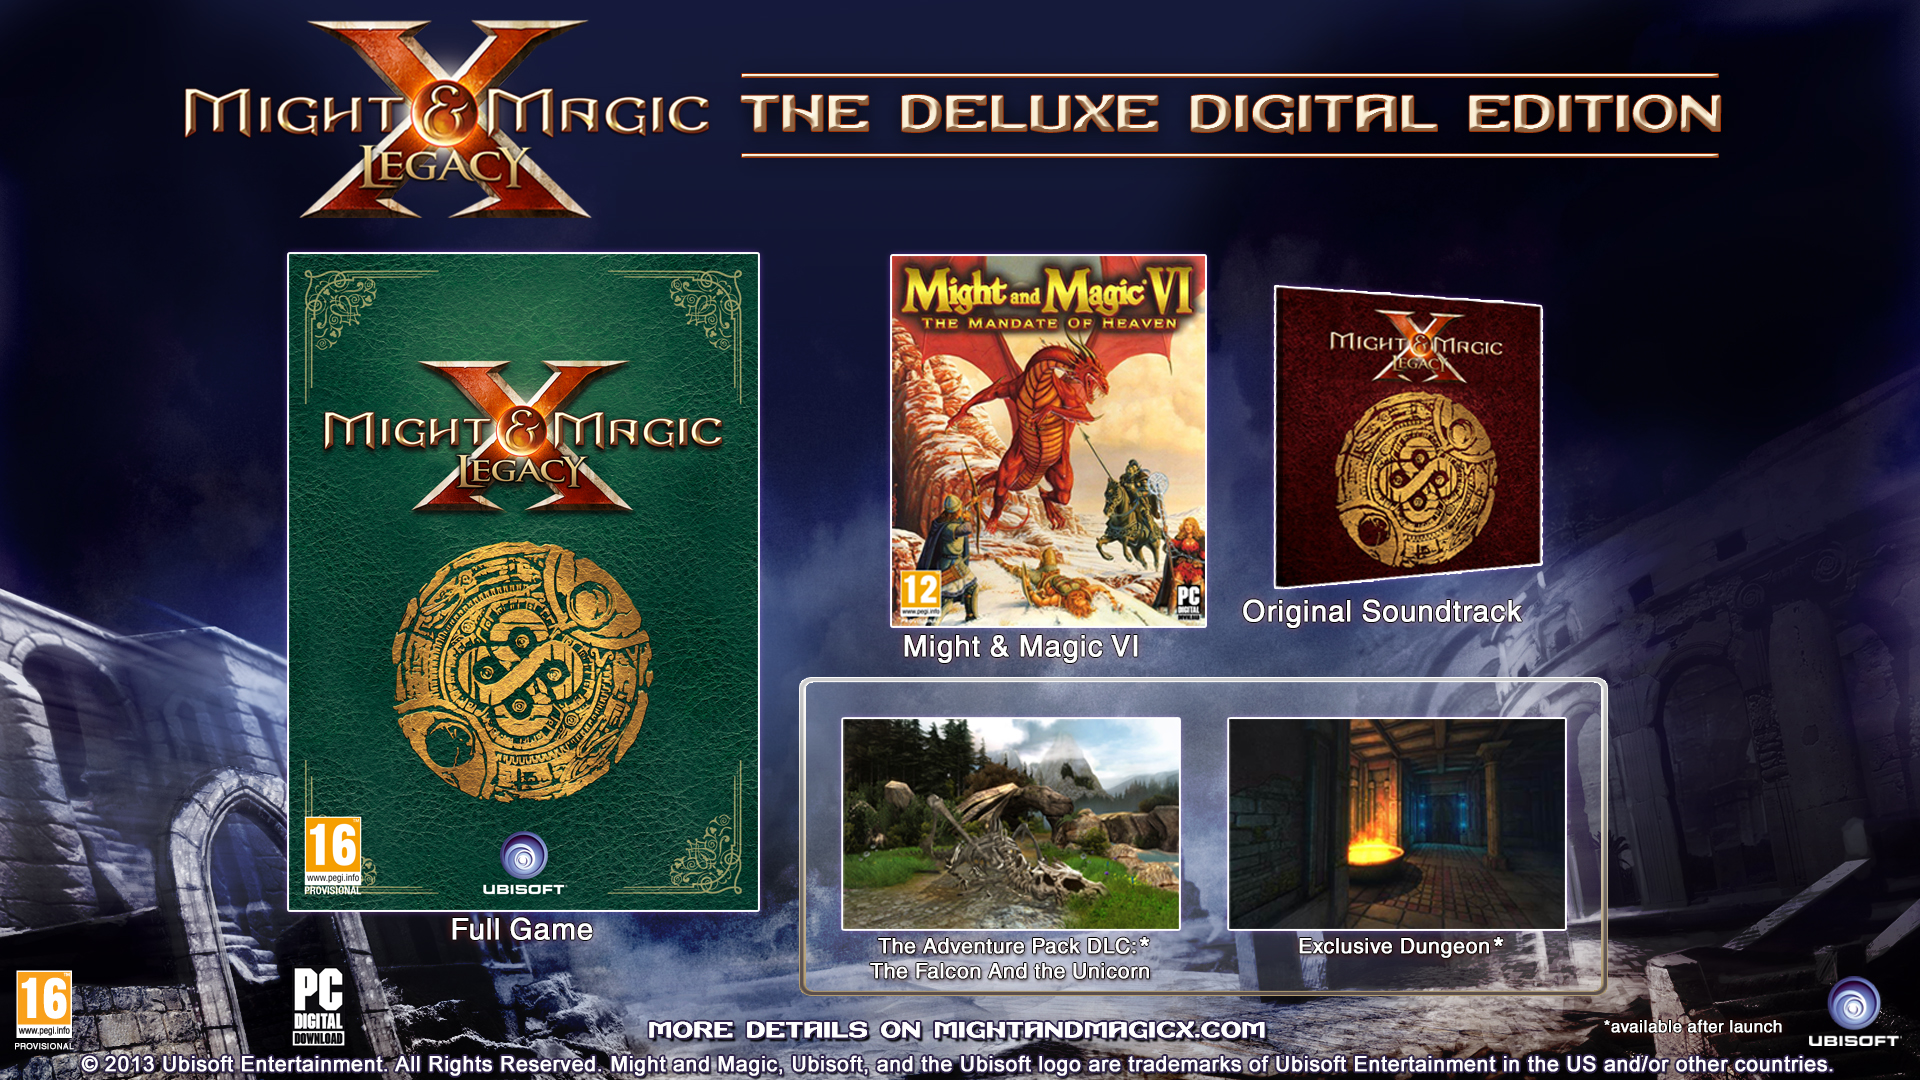 Save 75% on Might & Magic X - Legacy on Steam